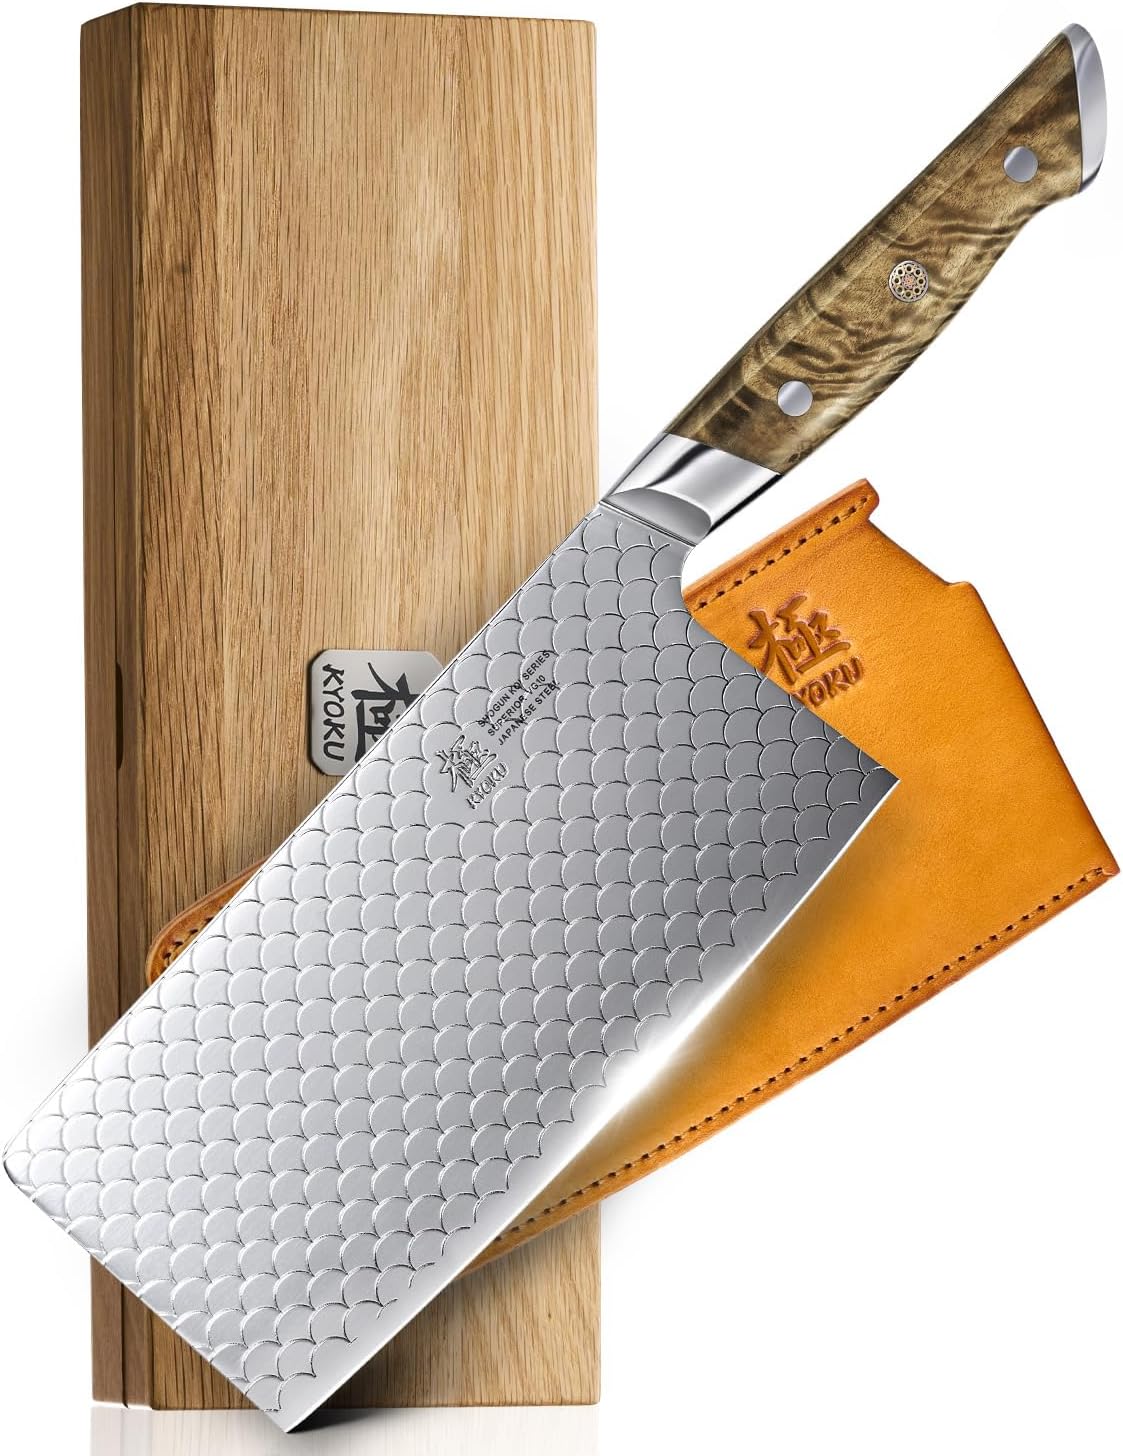 KYOKU 7 Vegetable Cleaver, Shogun Koi Series Vegetable Knife with Koi Scale Pattern, Japanese VG10 Stainless Steel Cleaver Knife with Sheath  Gift Box, Full Tang Kitchen Knife for Chopping  Slicing